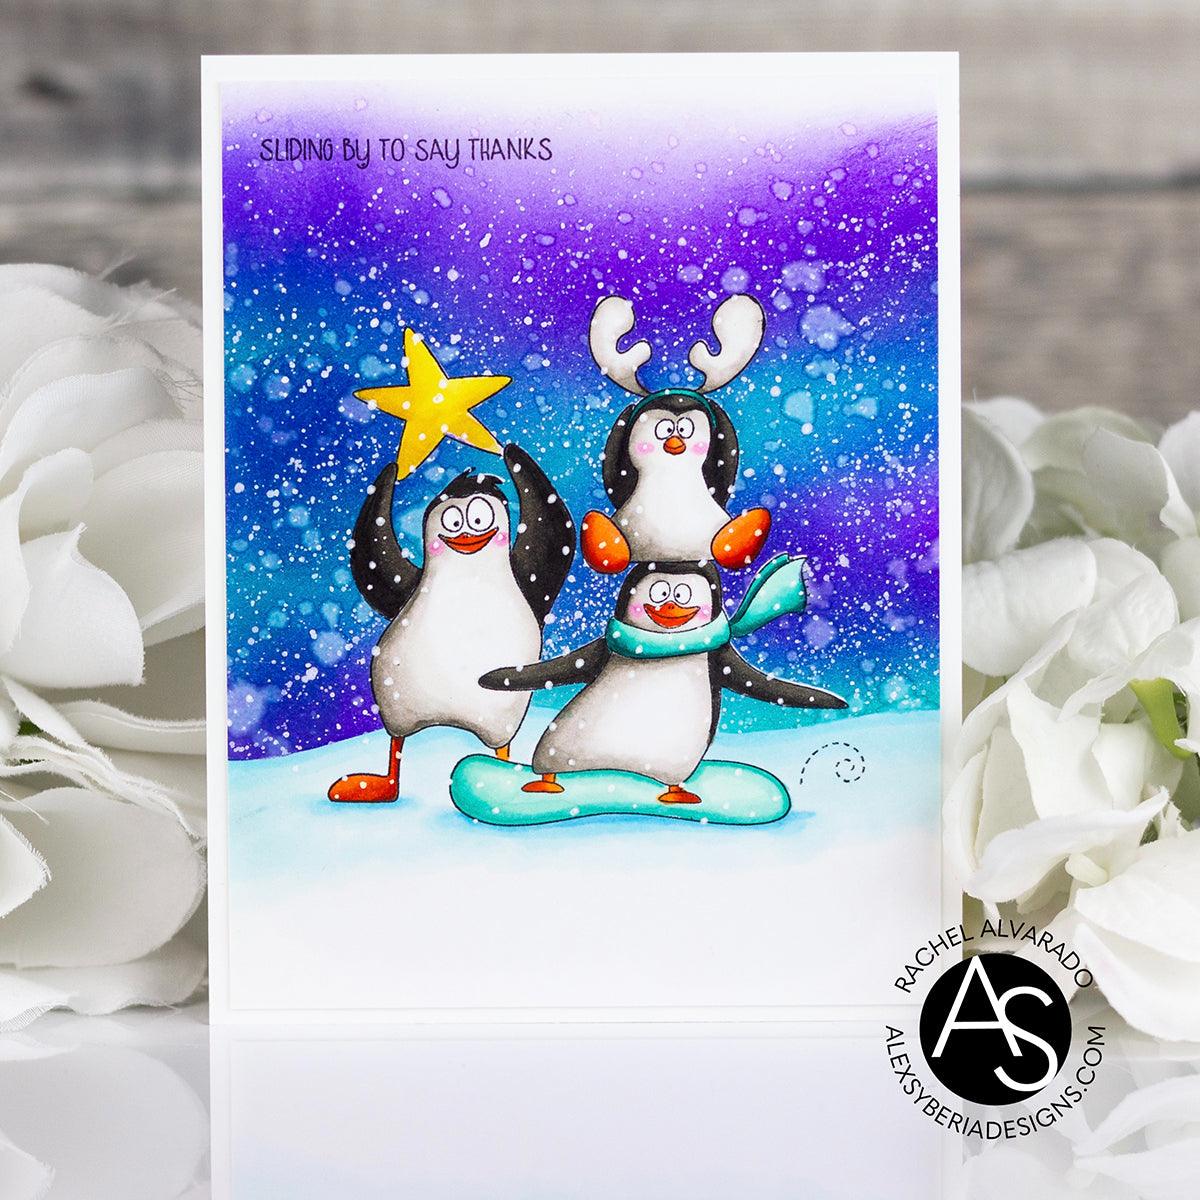 smile-and-wave-stamp-set-alex-syberia-designs-penguins-winter-christmas-stamps-sentiments-funny-snowboarding-stamp-ink-blending-cardmaking-technique-coloring